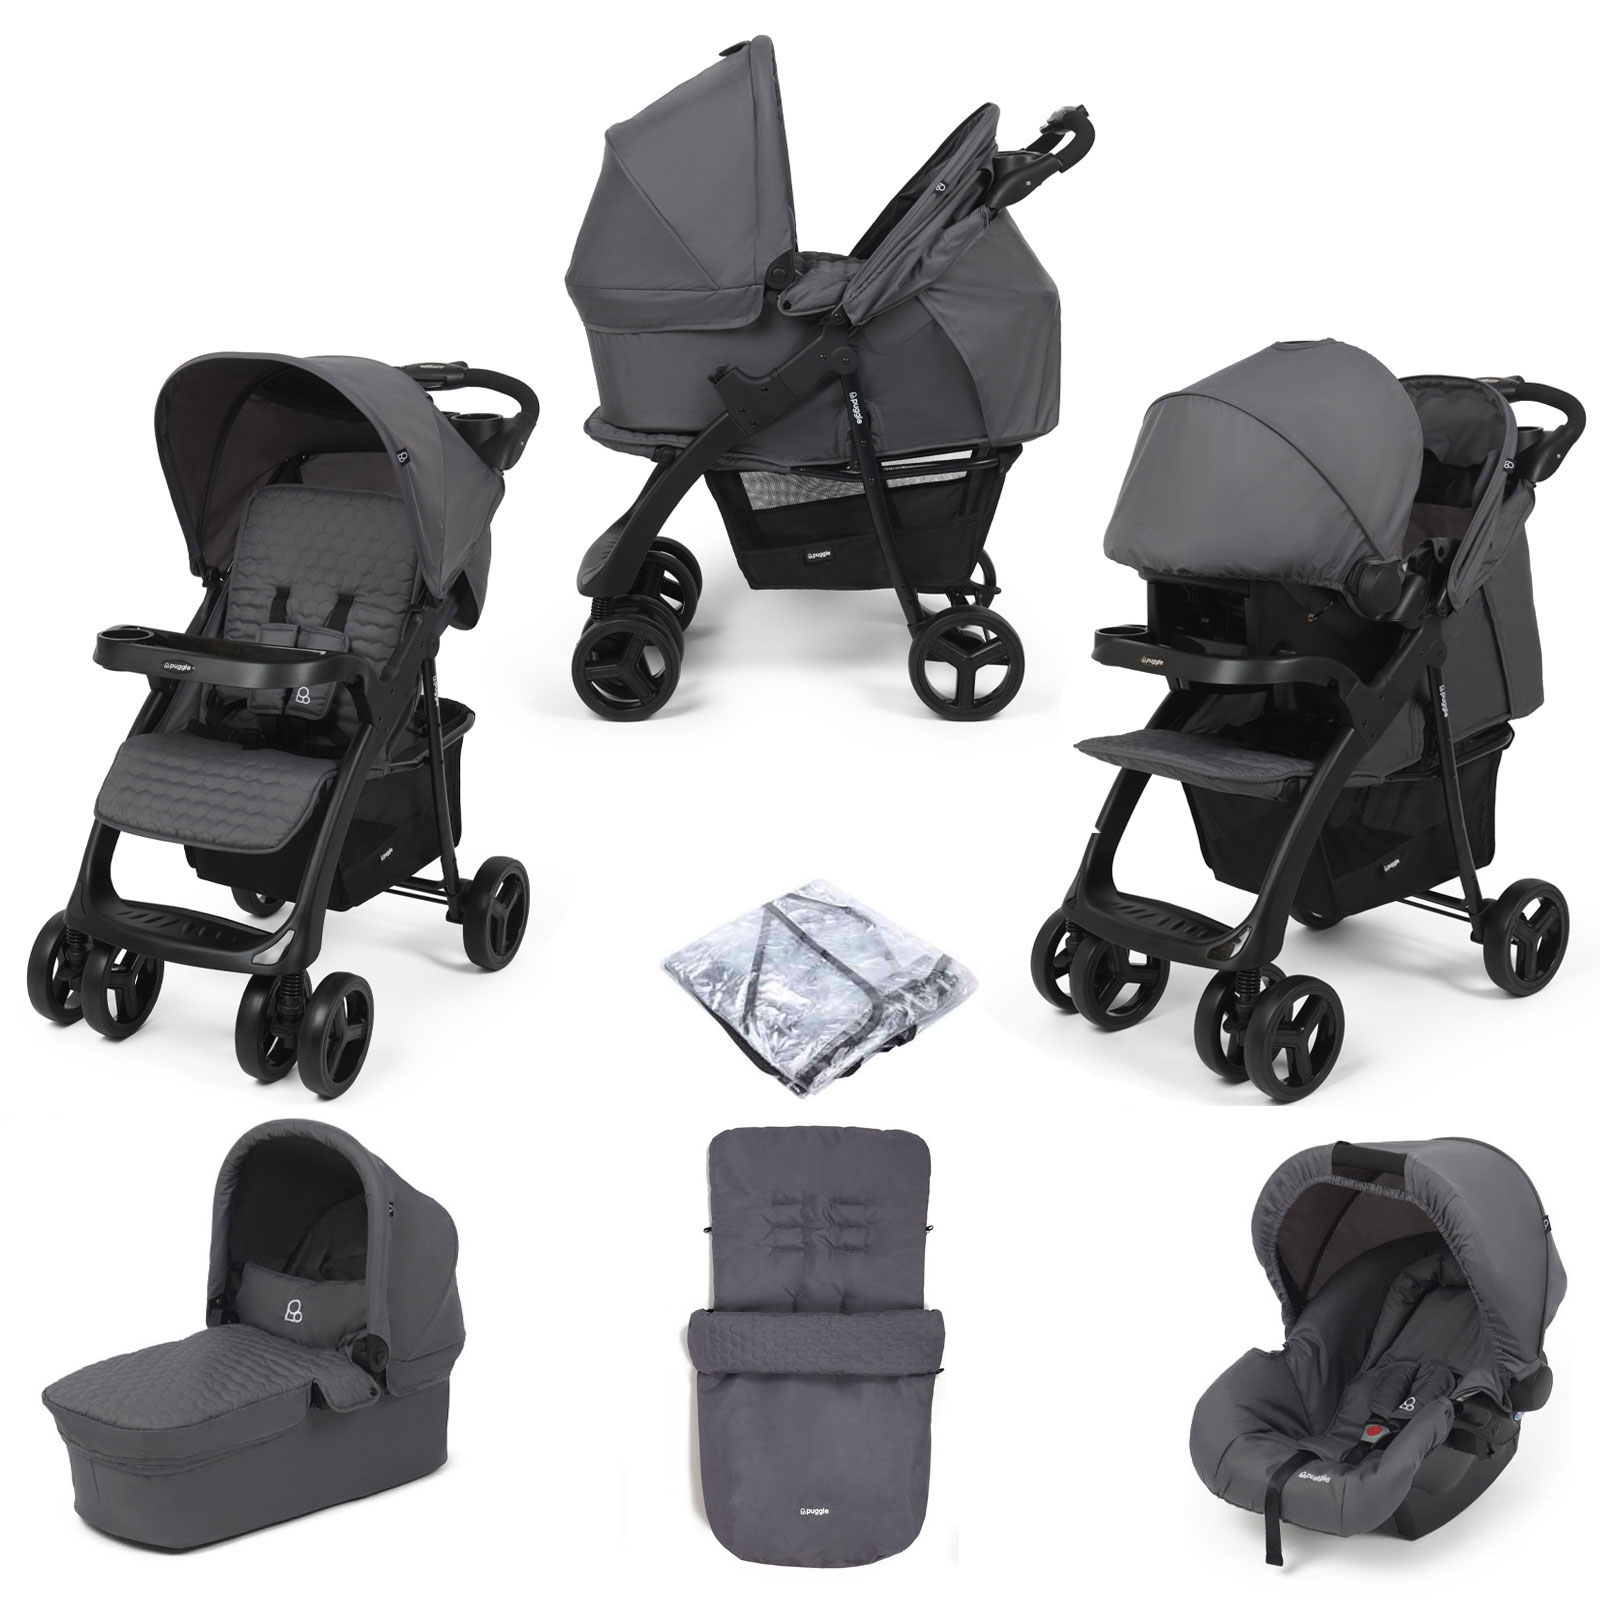 Puggle Denver Luxe 3in1 Travel System with Raincover & Footmuff - Slate Grey